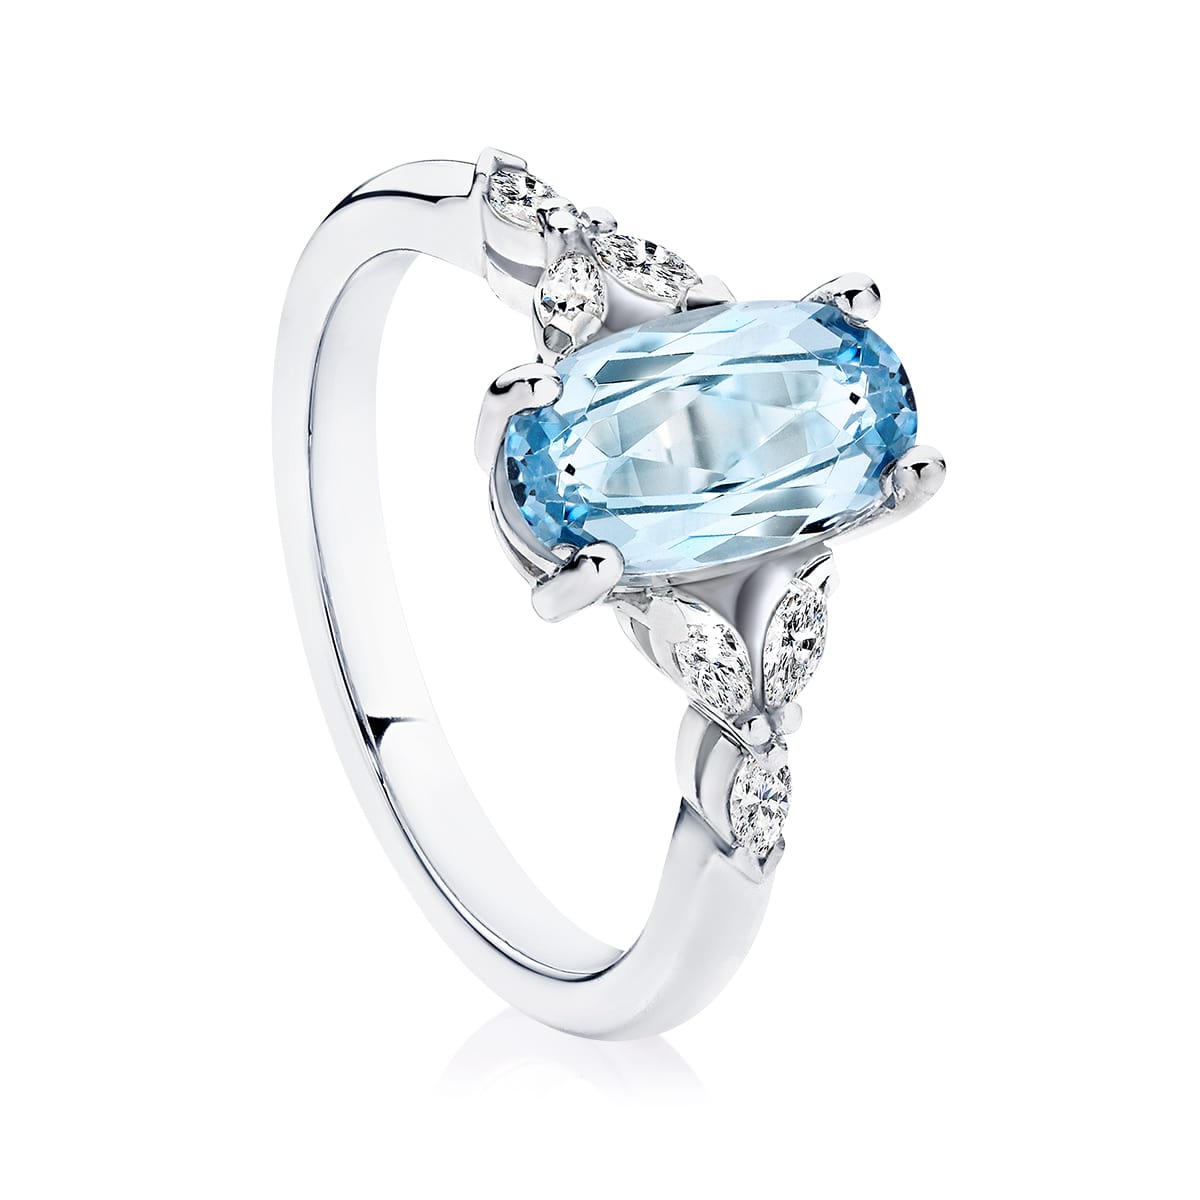 The Reflection Engagement Ring with Half Moon Cut Diamonds and Sapphir –  ARTEMER